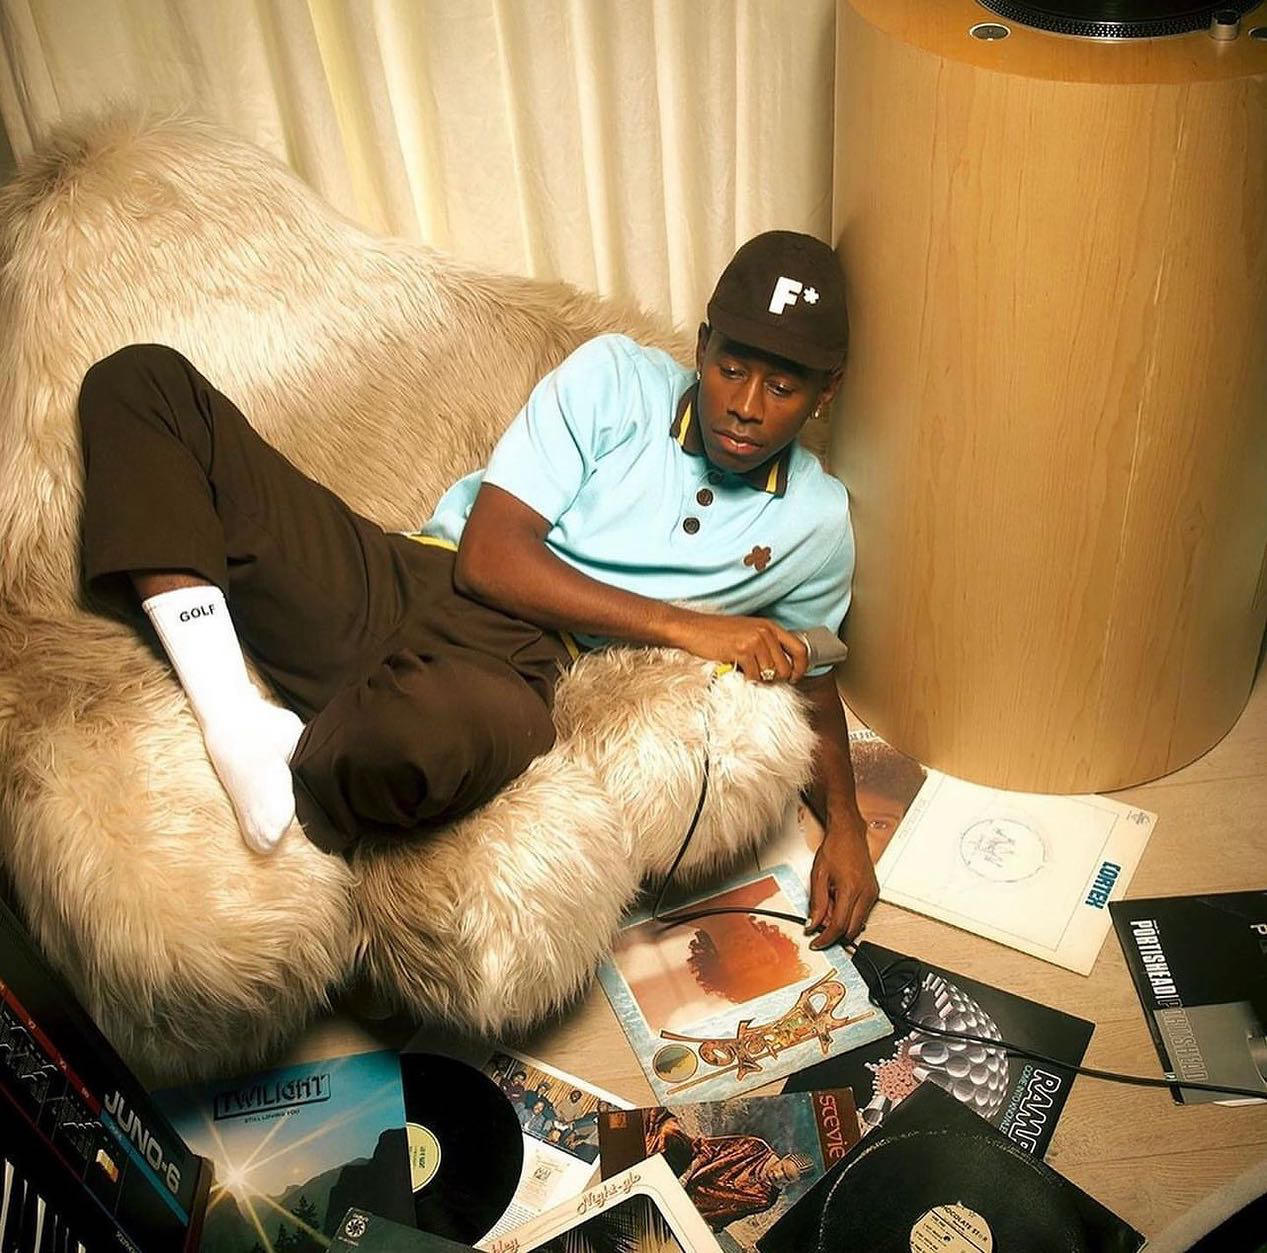 Somewhere I Would Like To Live - #feliciathegoat lounging on a “yeti” rocking chair by #marioscheinc